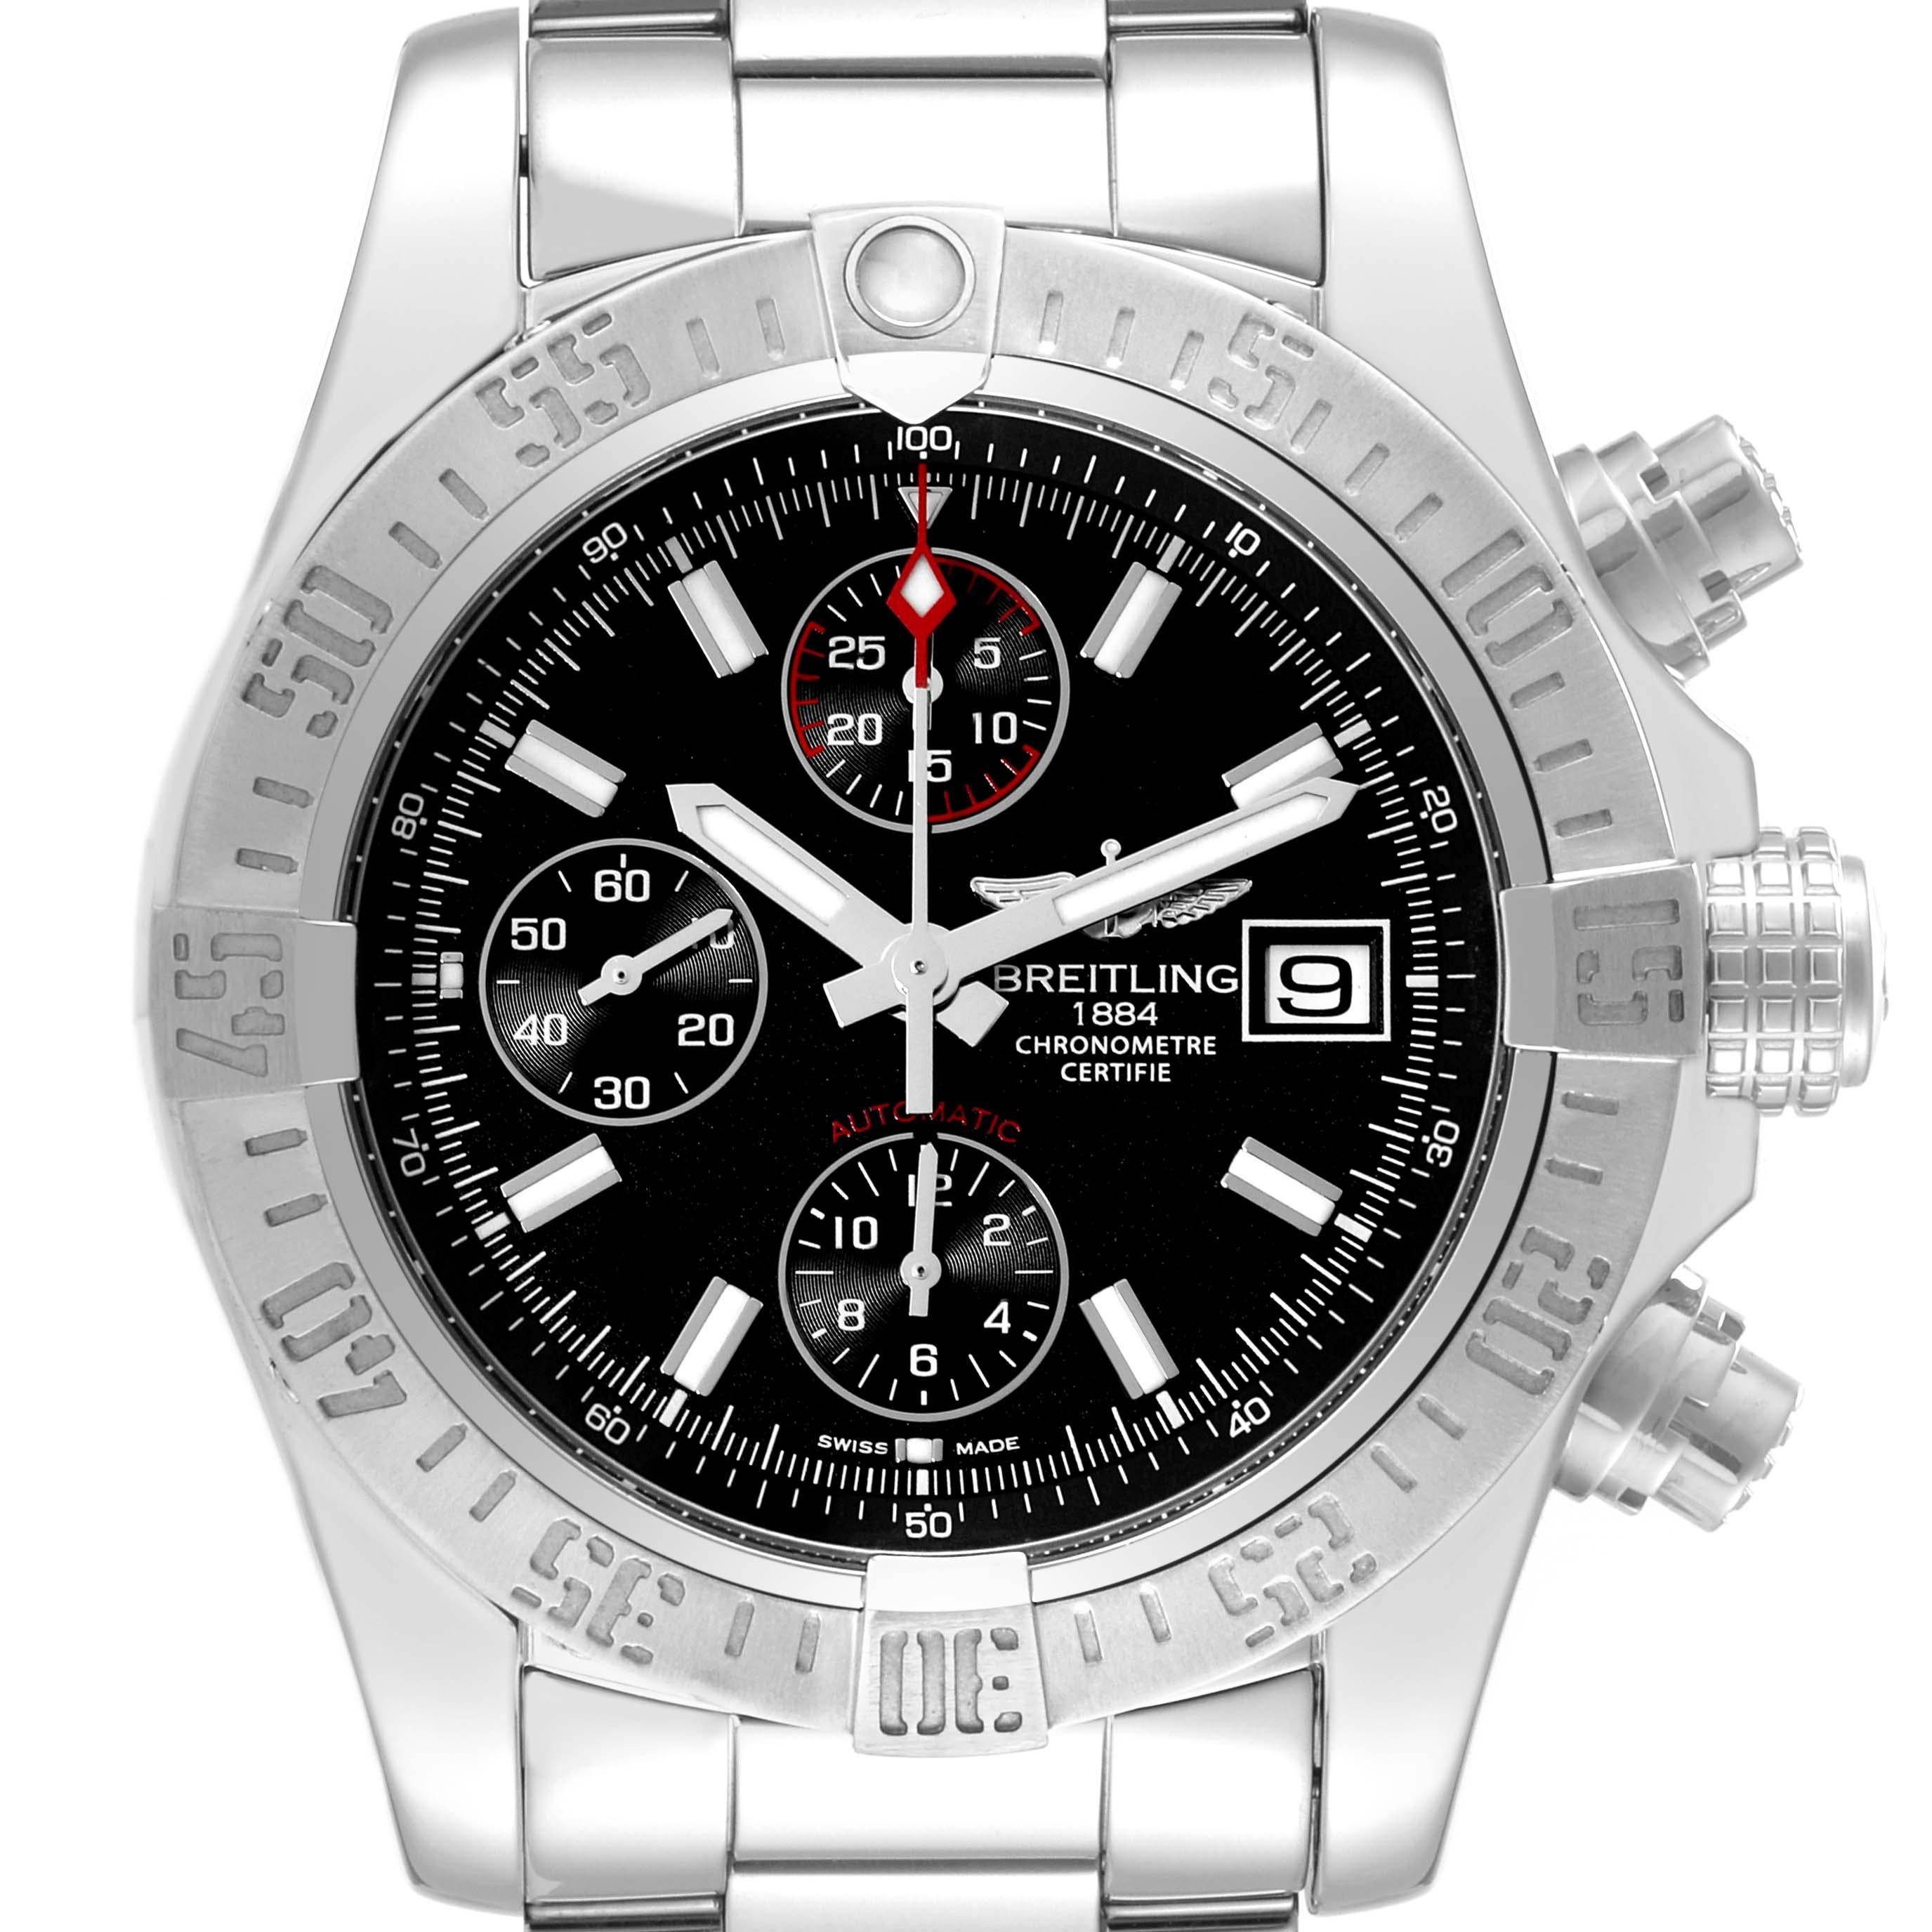 Breitling Aeromarine Super Avenger Black Dial Steel Mens Watch A13381. Officially certified chronometer automatic self-winding chronograph movement. Stainless steel case 43 mm in diameter with pushers and a screwed-down crown. Stainless steel